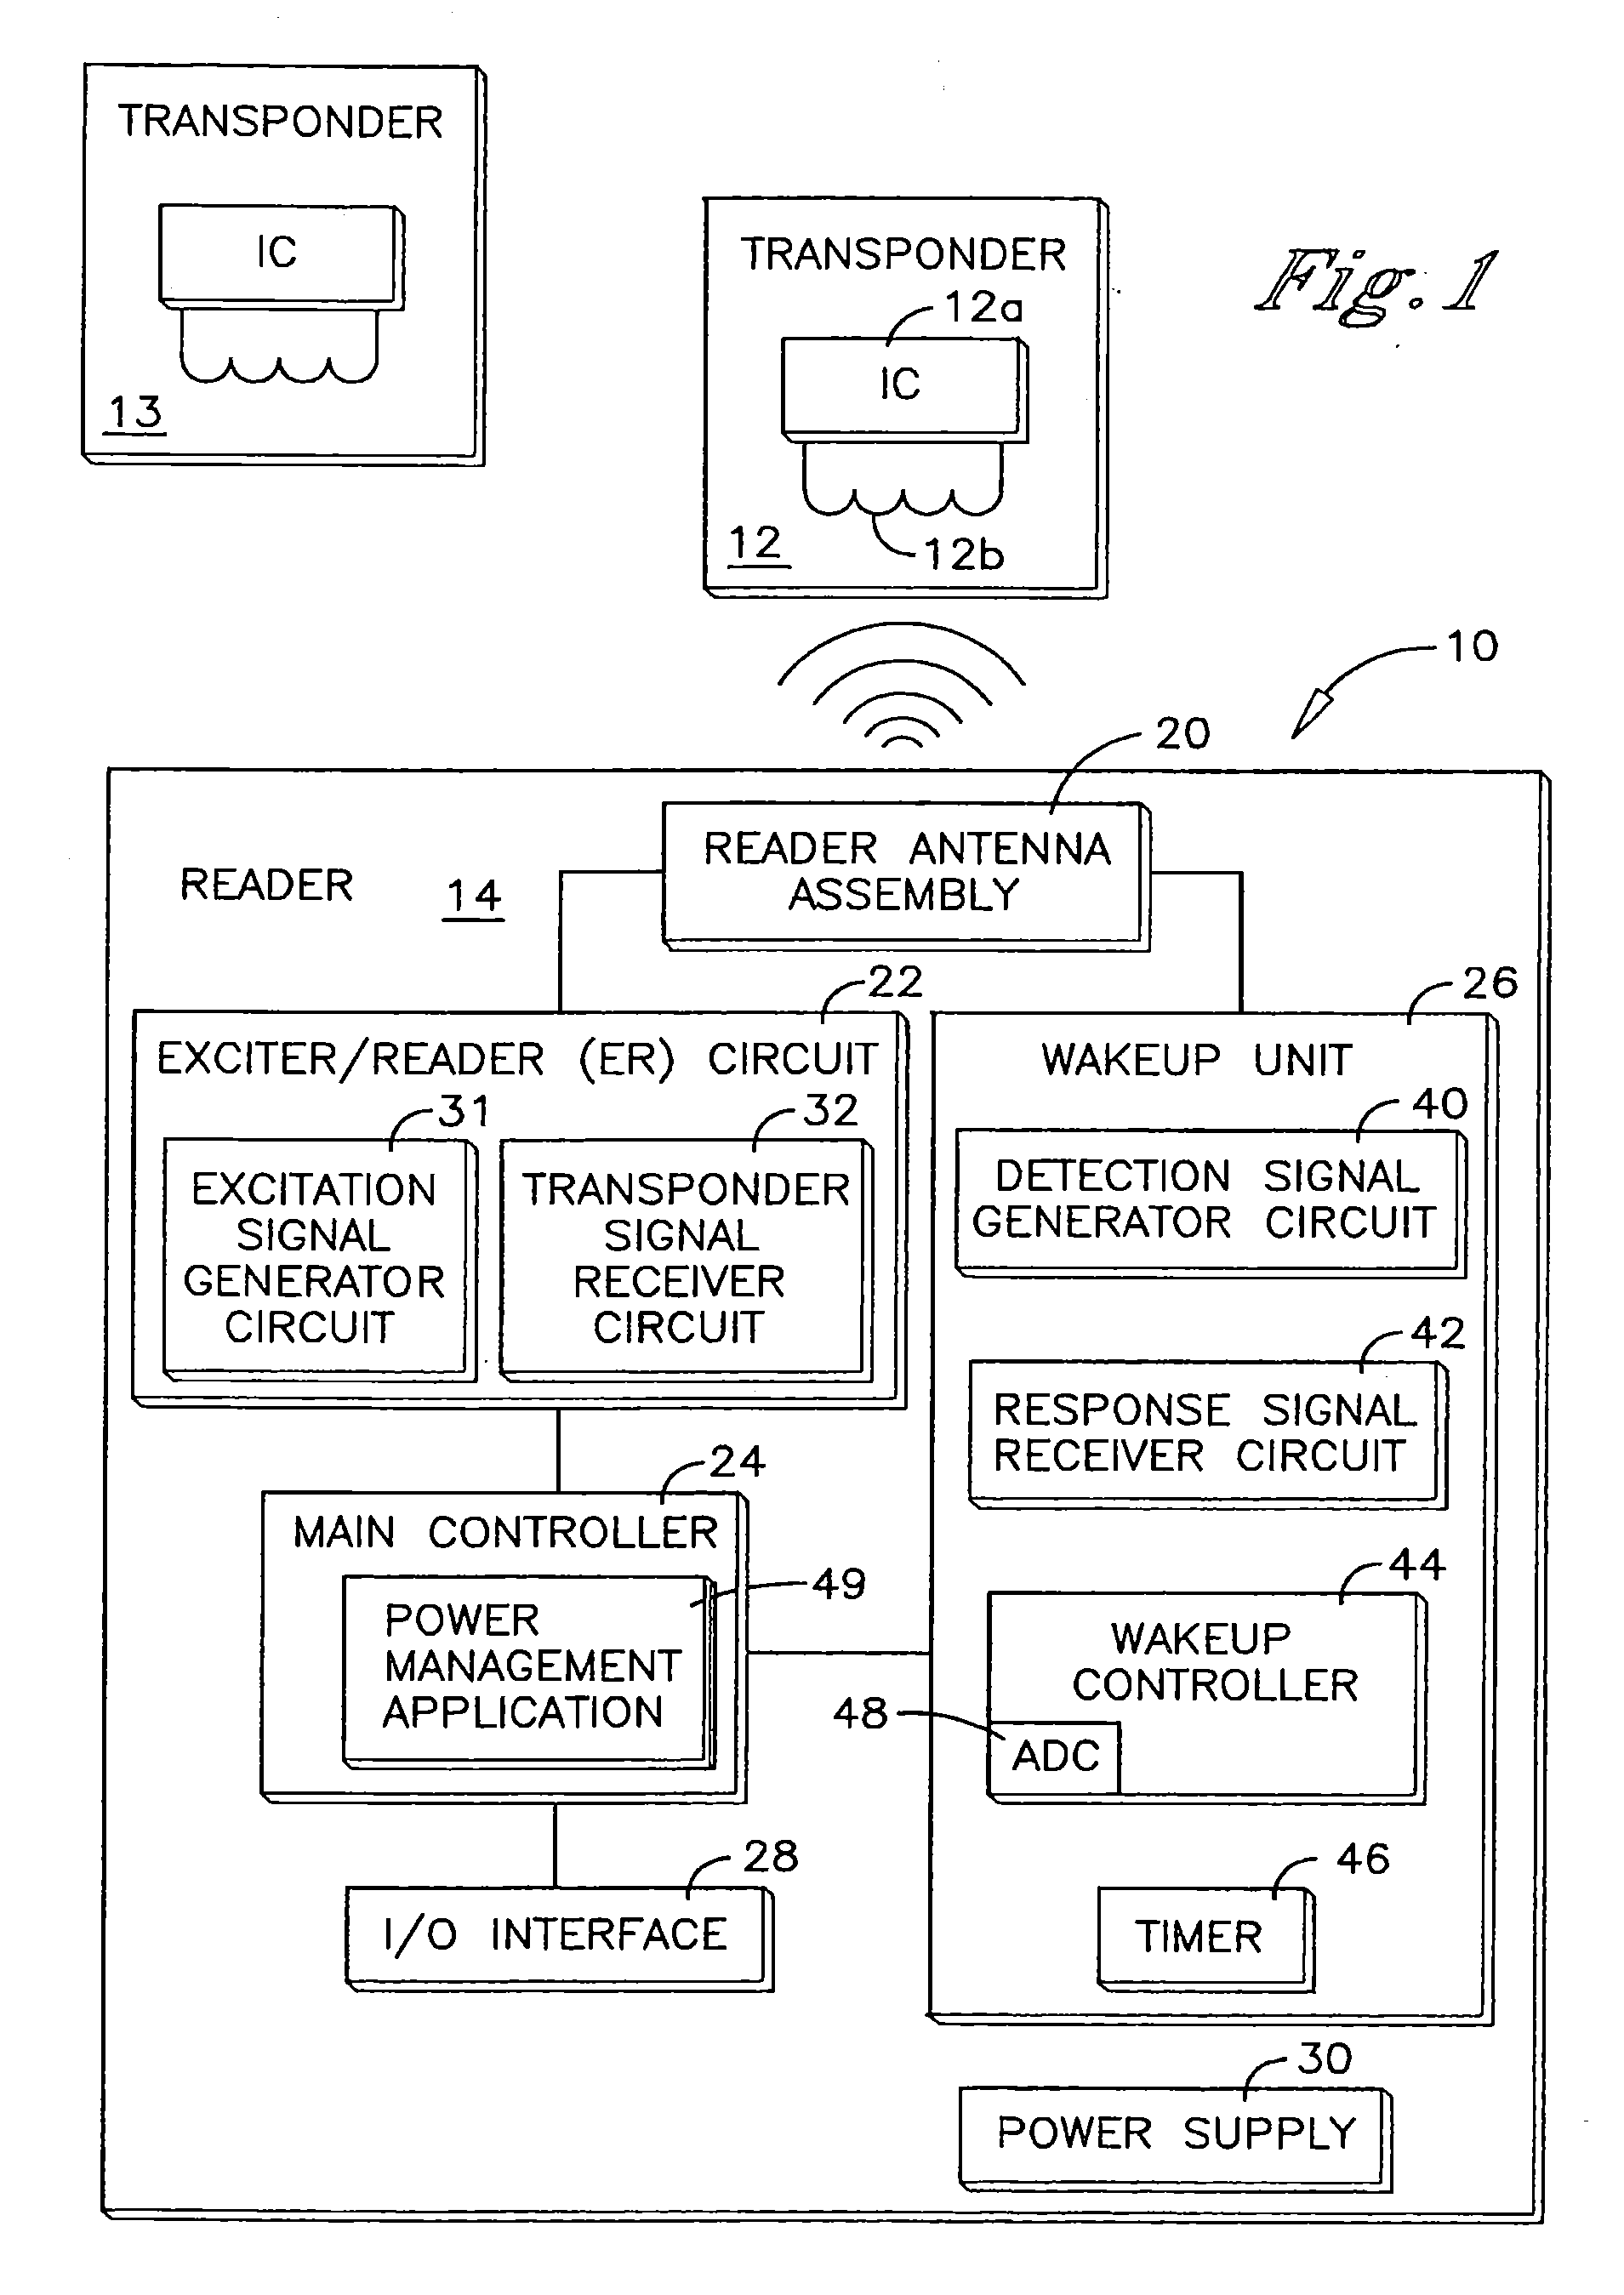 Switched capacitance method for the detection of, and subsequent communication with a wireless transponder device using a single antenna